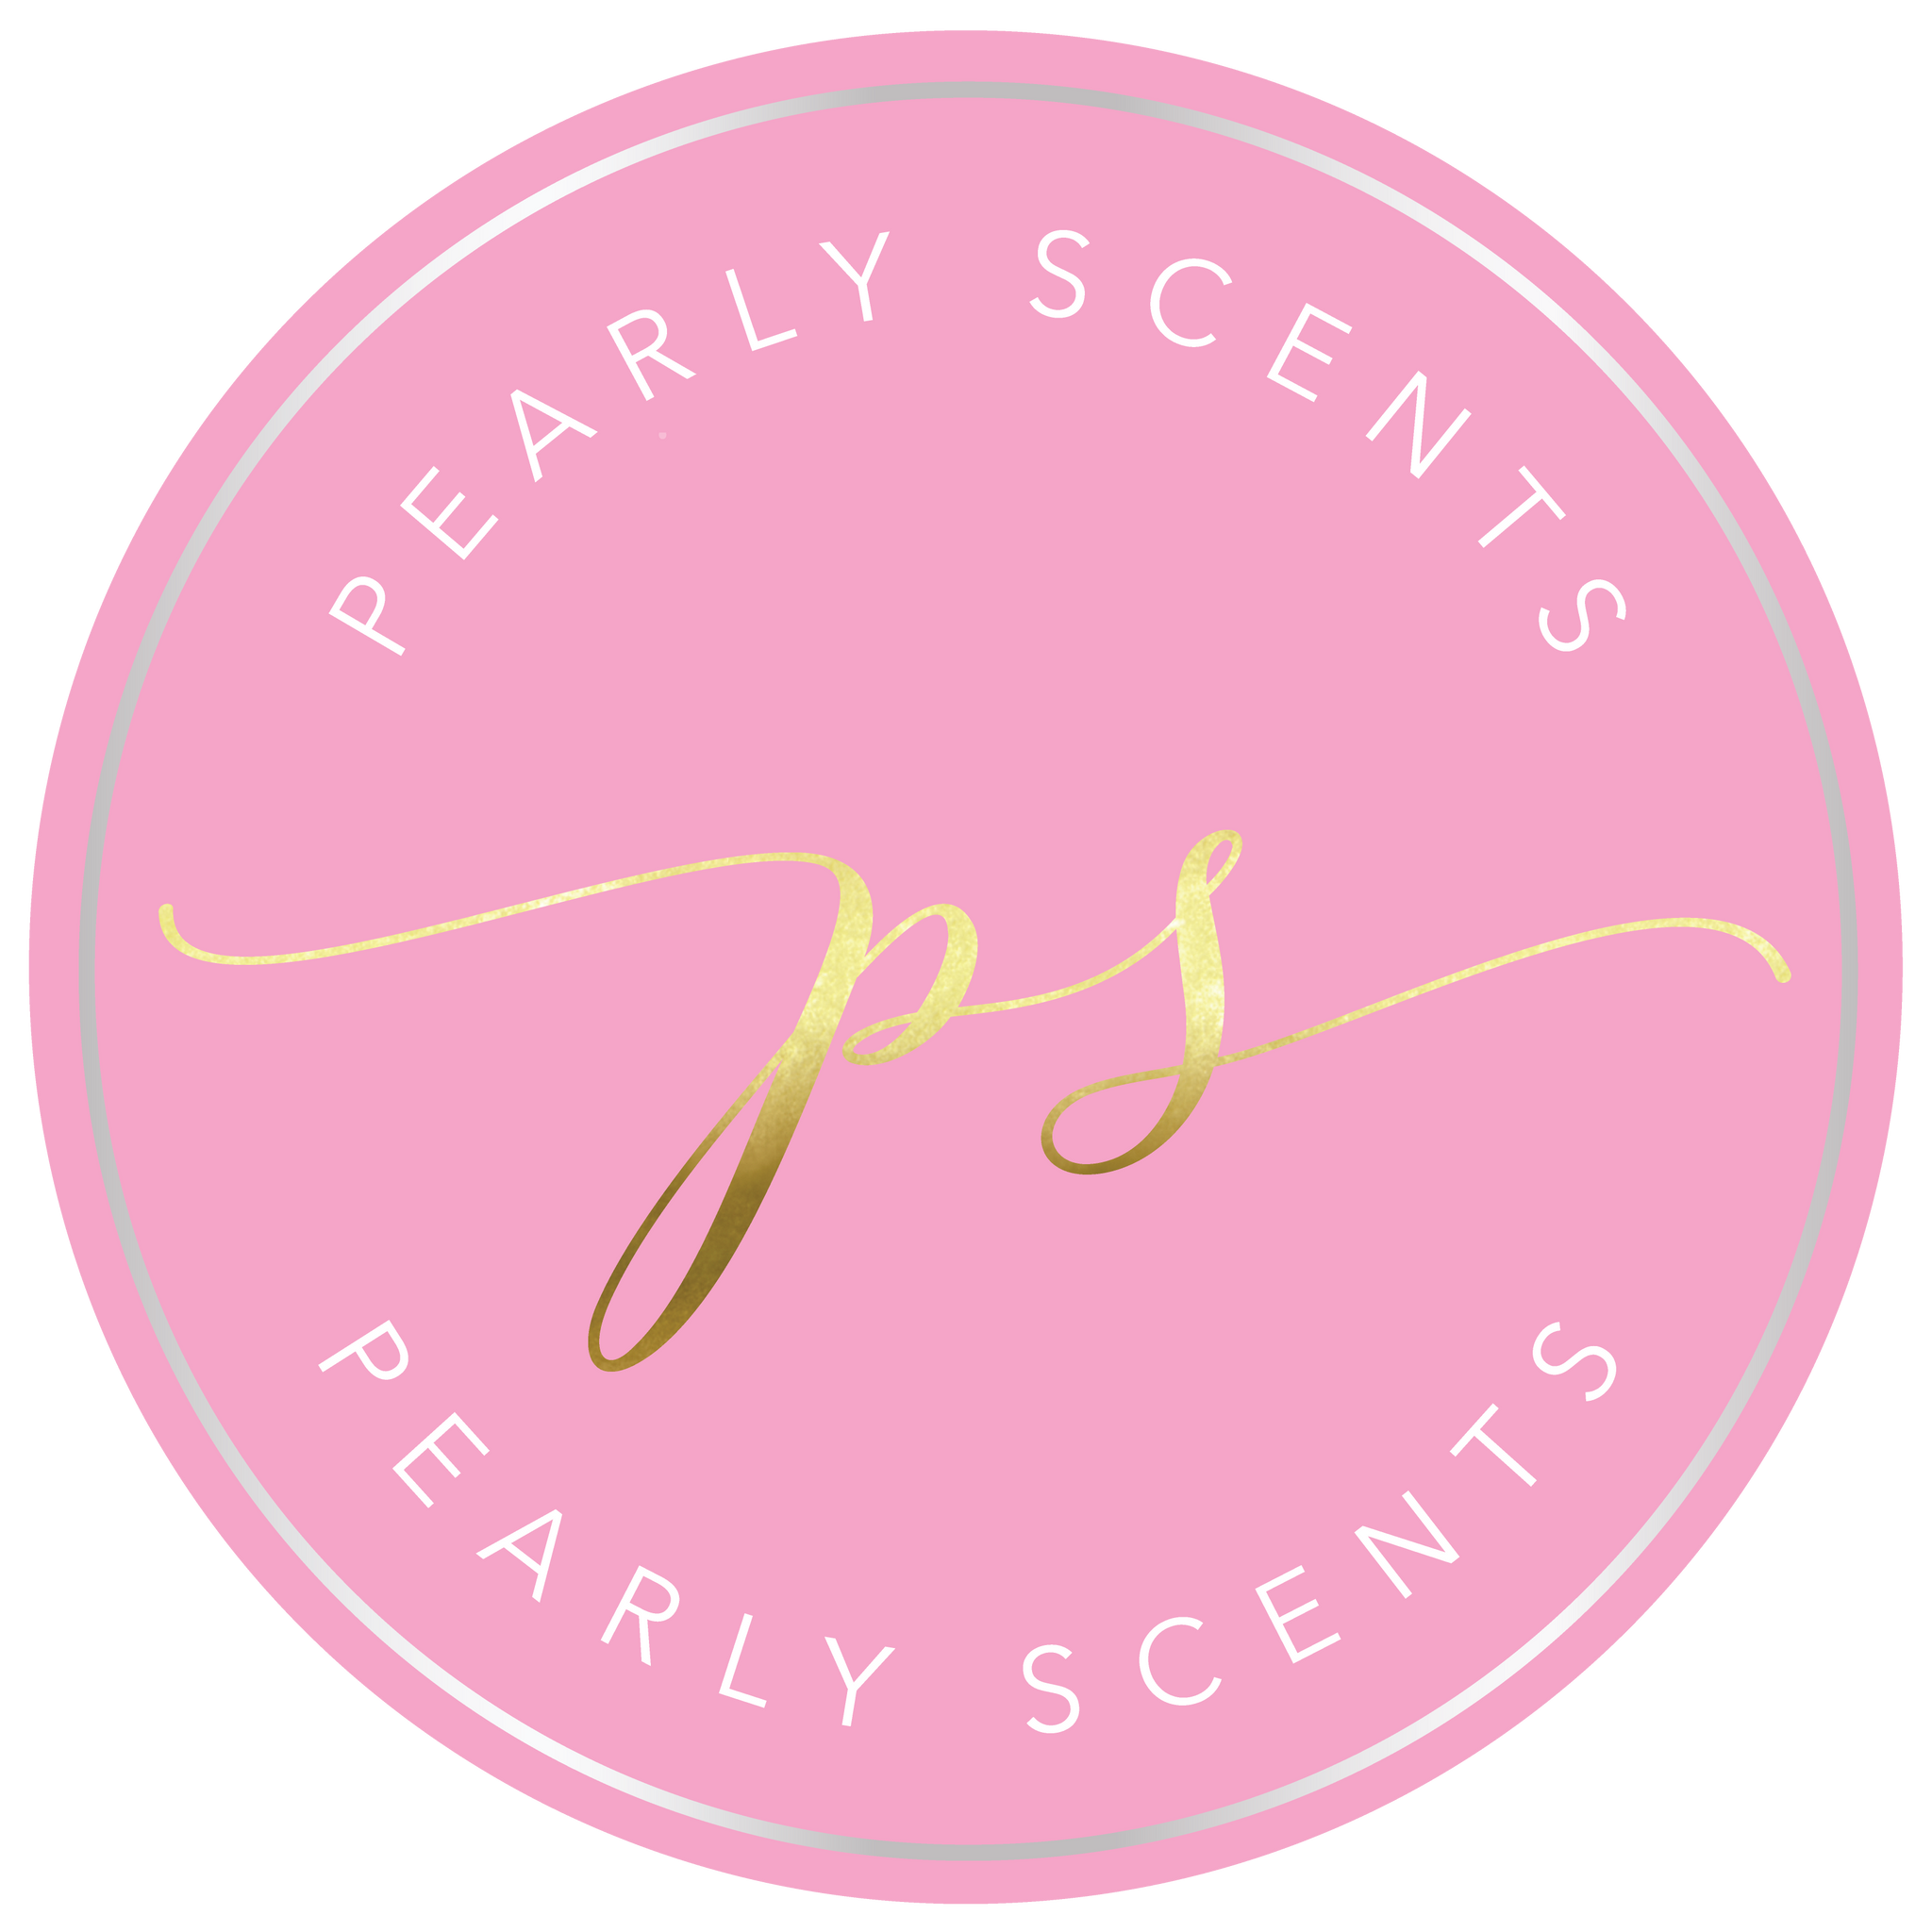 Pearly Scents E-Gift card